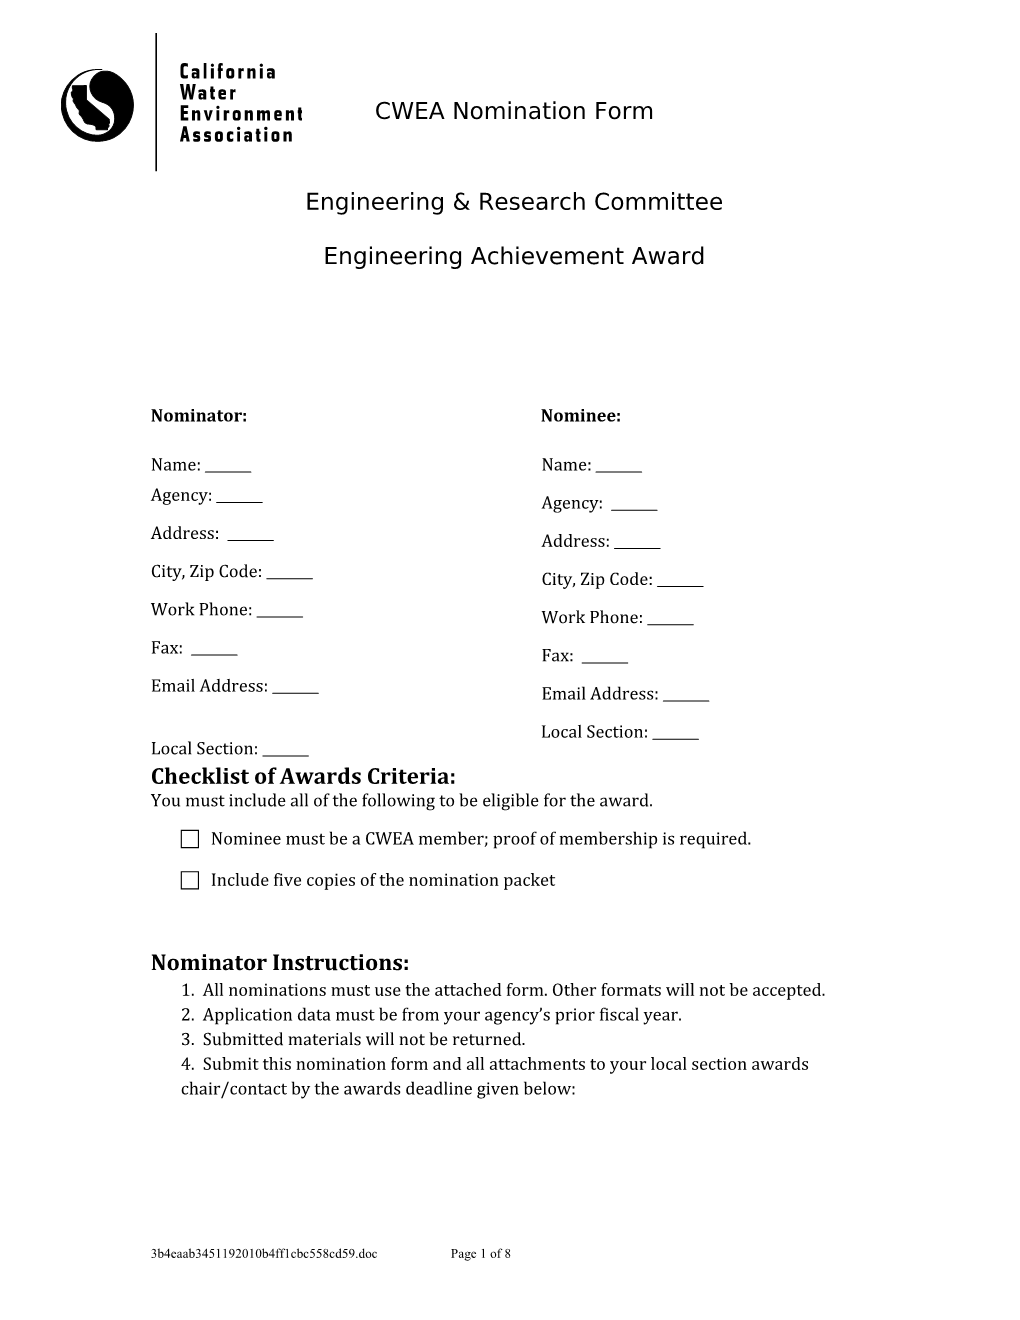 Engineering & Research Committee